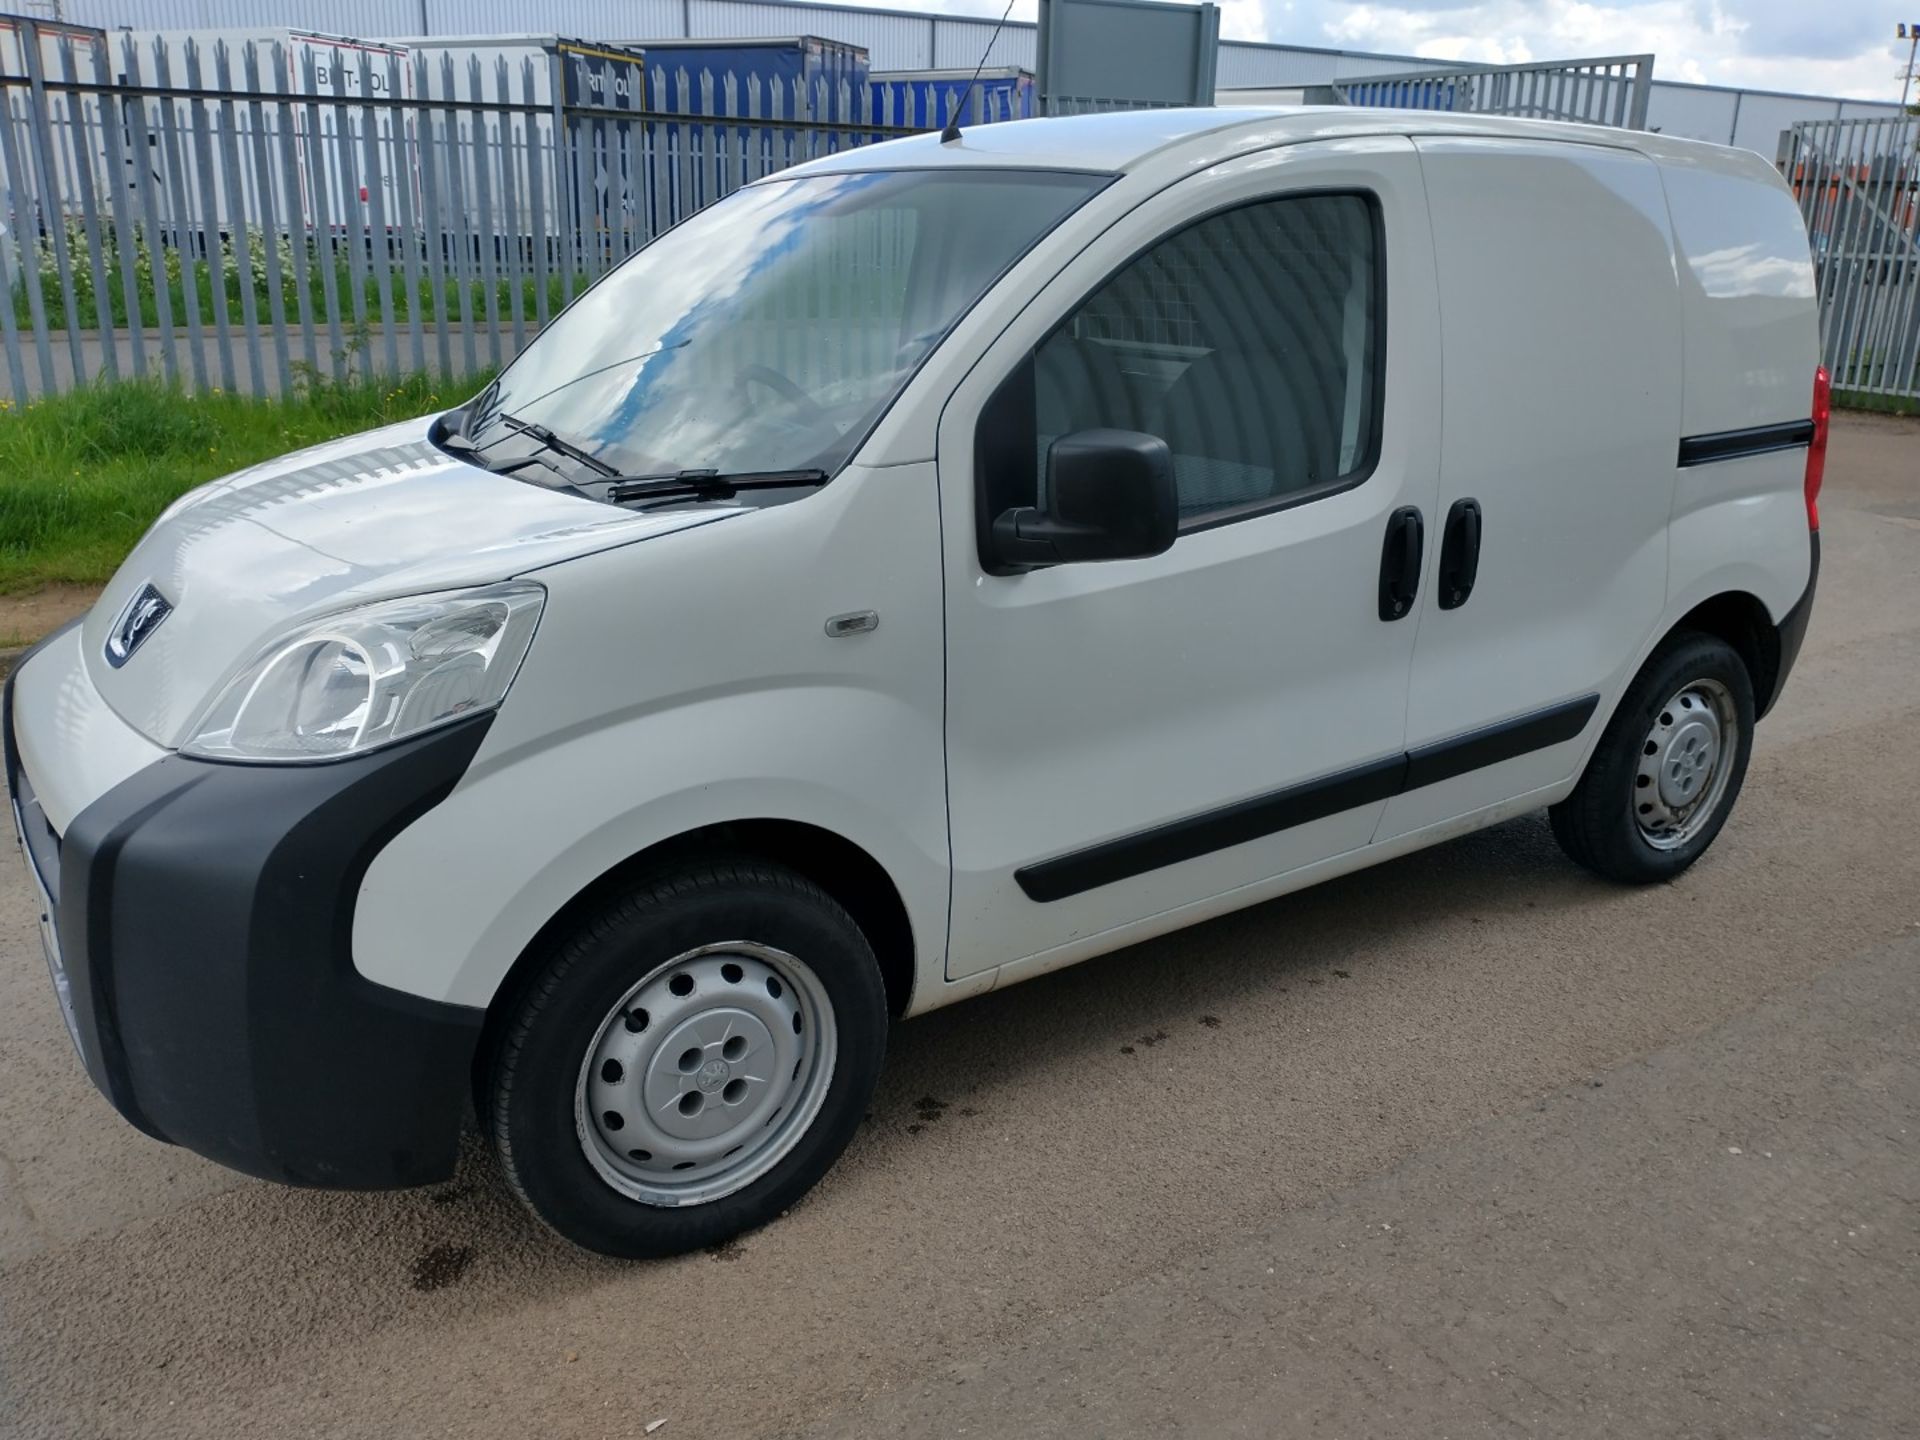 2016 Peugeot Bipper S Hdi Panel van - CL505 - Location: Corby - Image 13 of 15